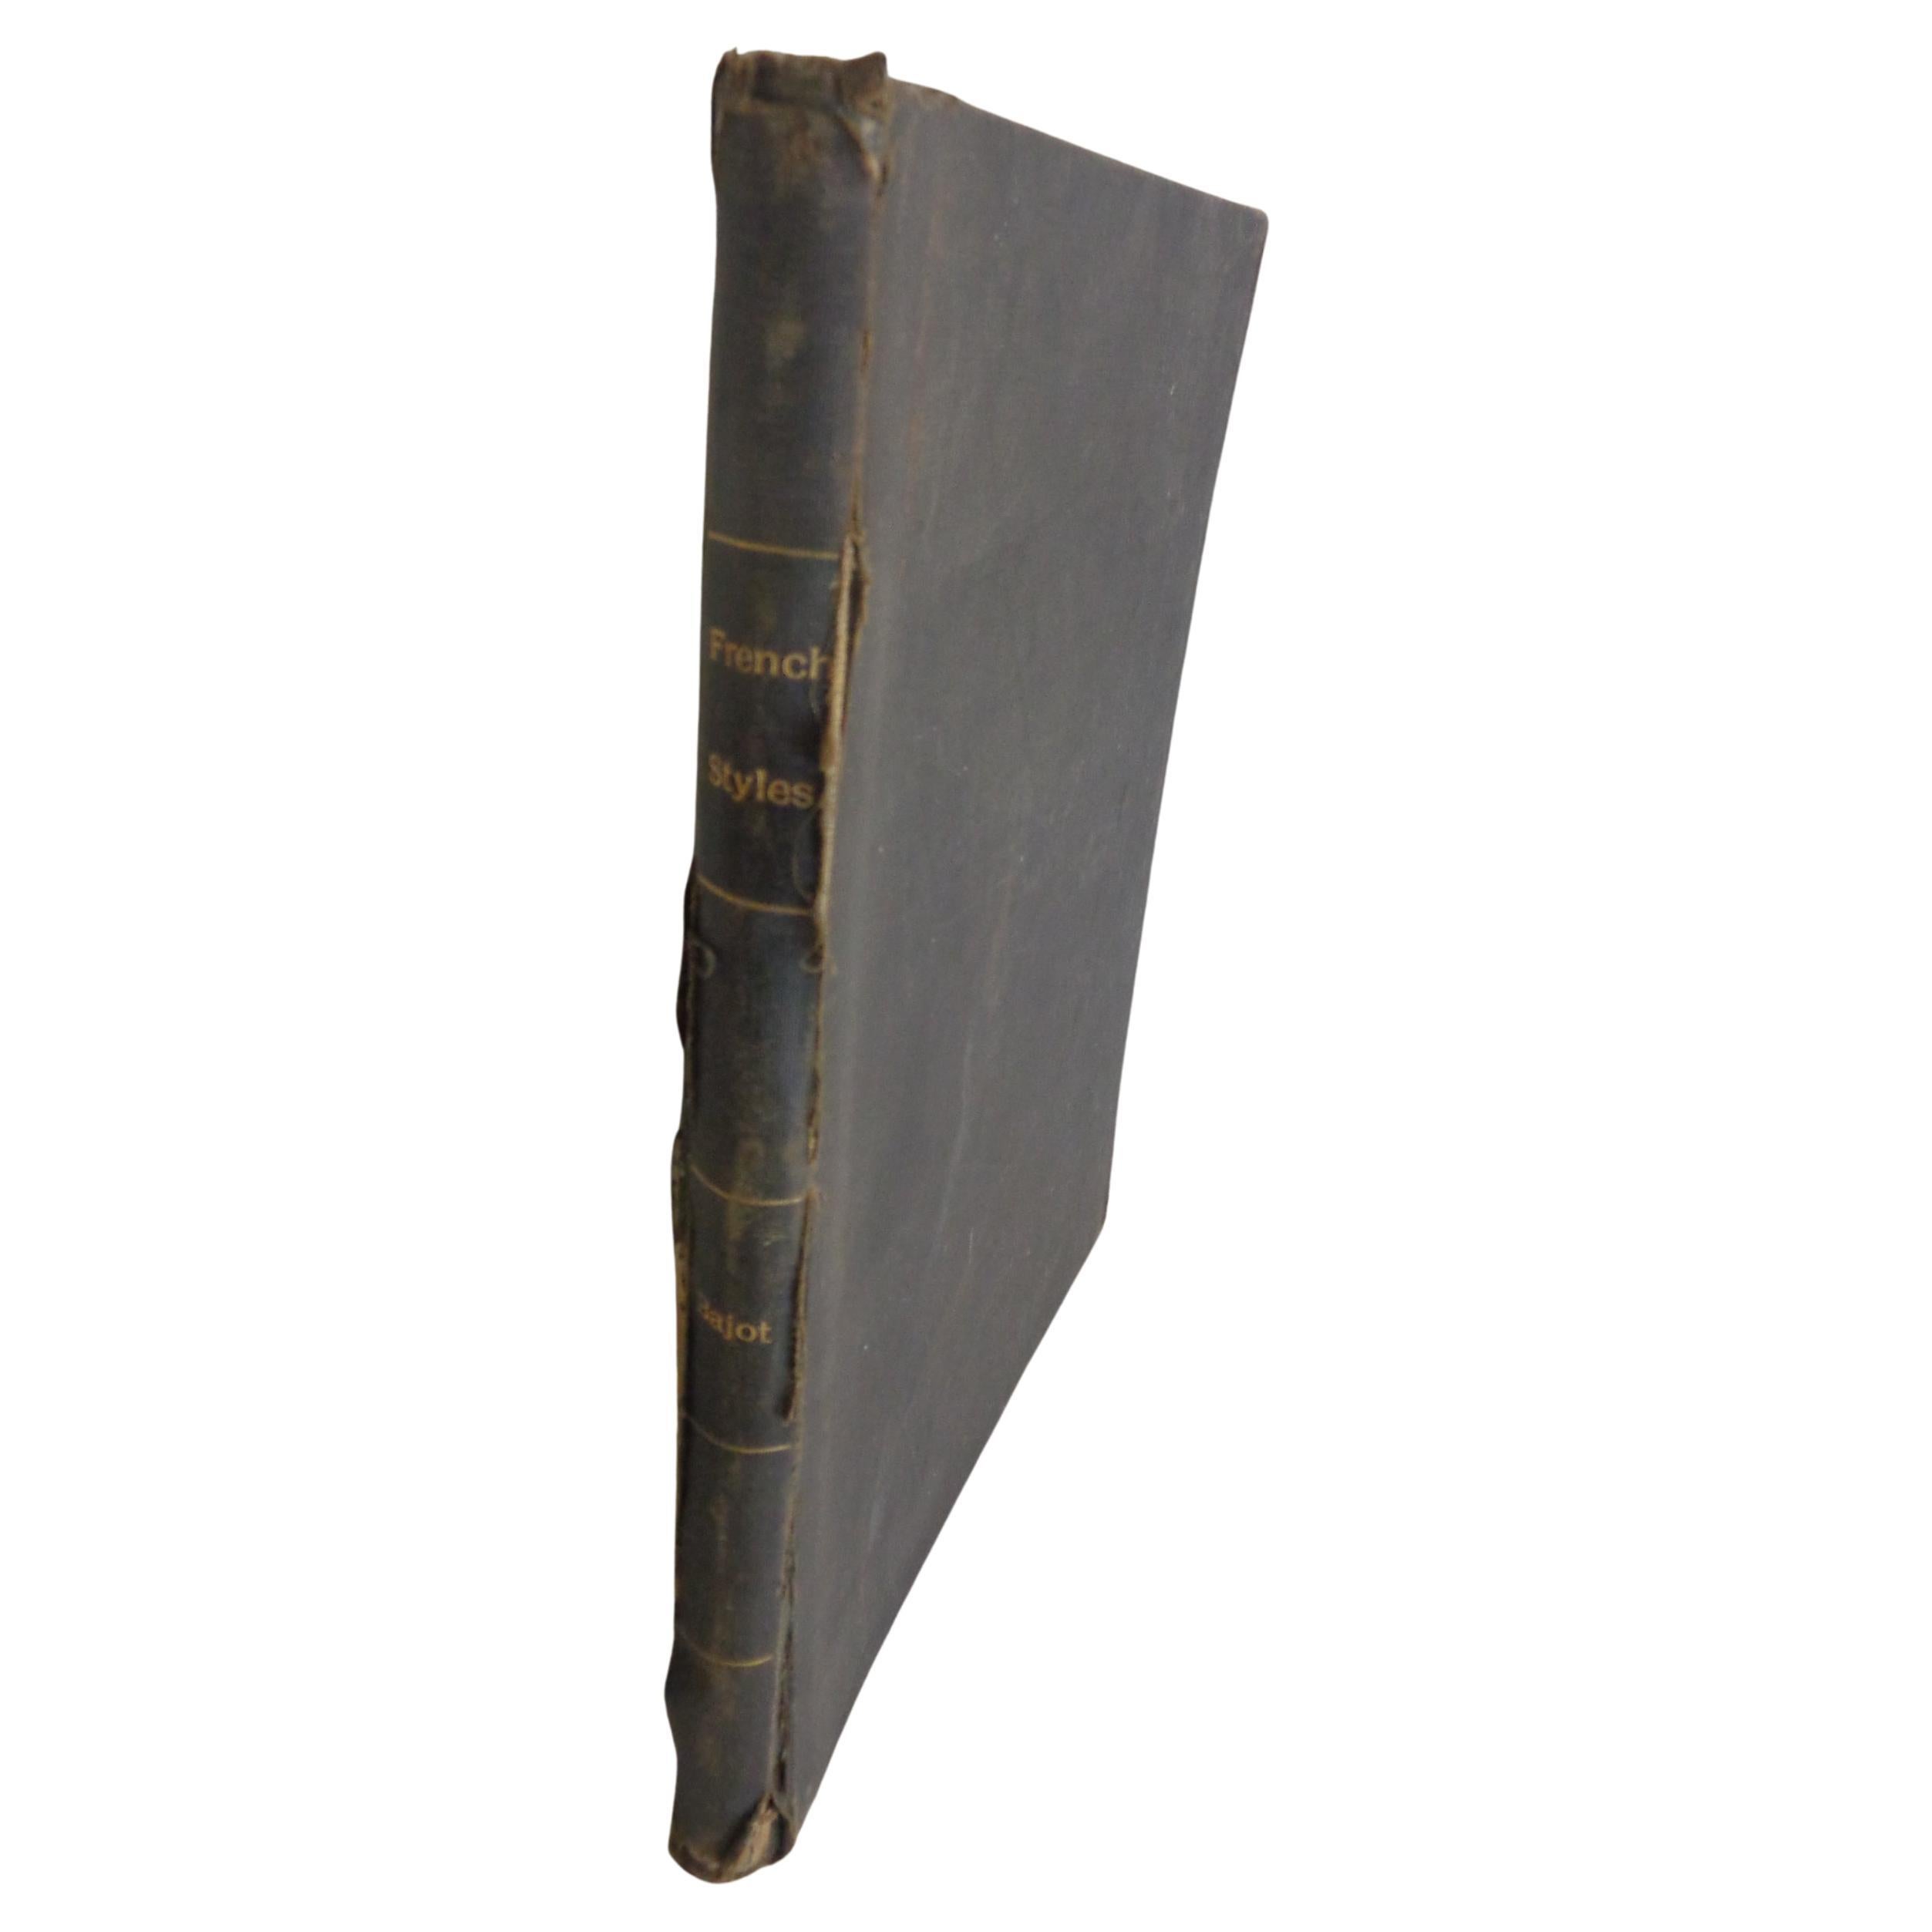 Antique black cloth hardcover book w/ gilt lettering and decorated interior boards and end papers.  FRENCH STYLES:  Furniture and Architecture - 1500 Examples - Structural and Ornamental Details of Original Work - Gothic, Francois I, Henri II, Henri